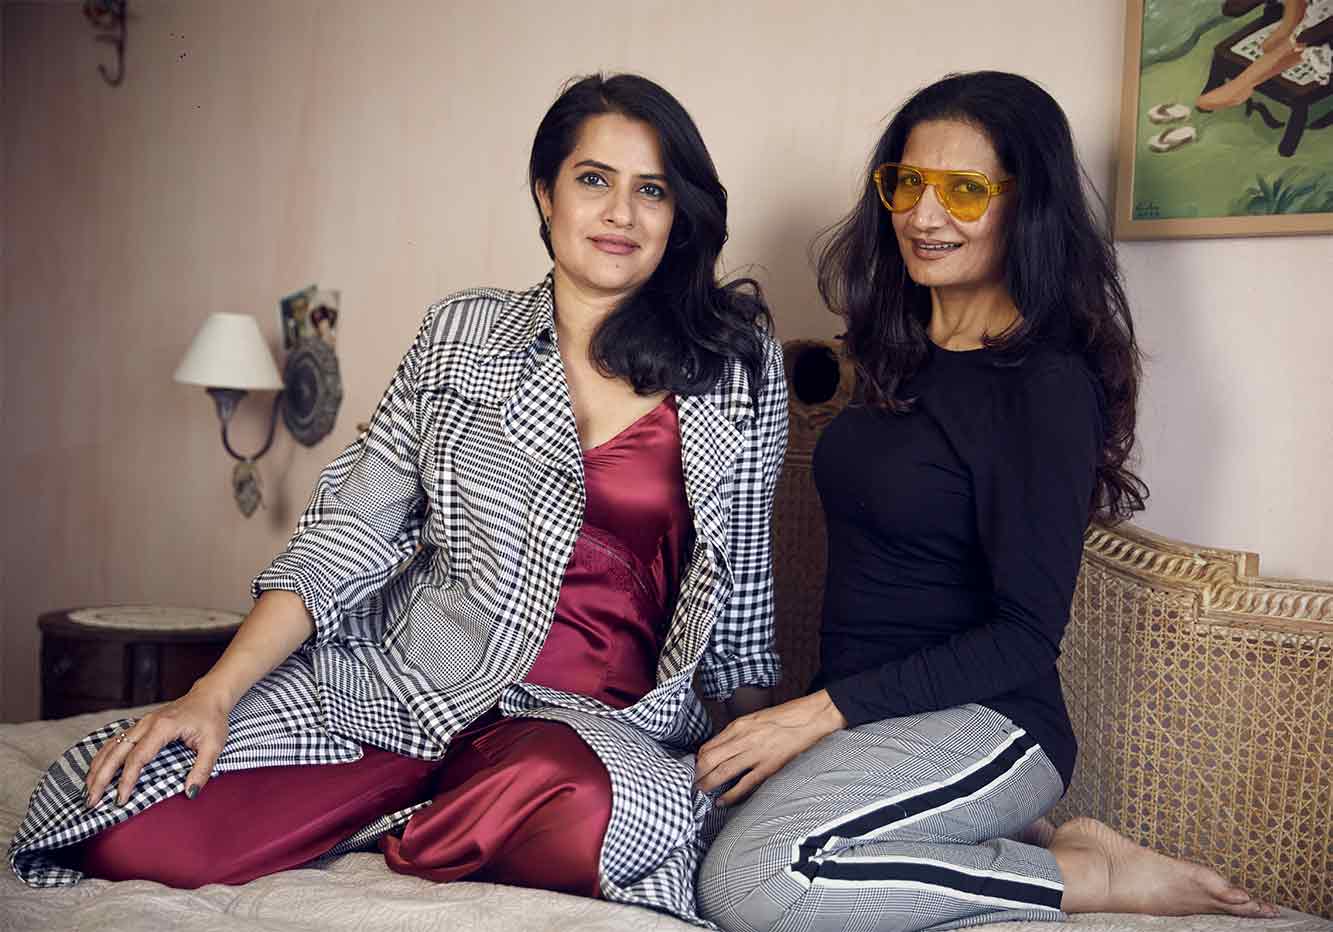 Singer-songwriter Sona Mohapatra And Her Friend, Interior Designer Tejal Mathur - Beautiful Homes